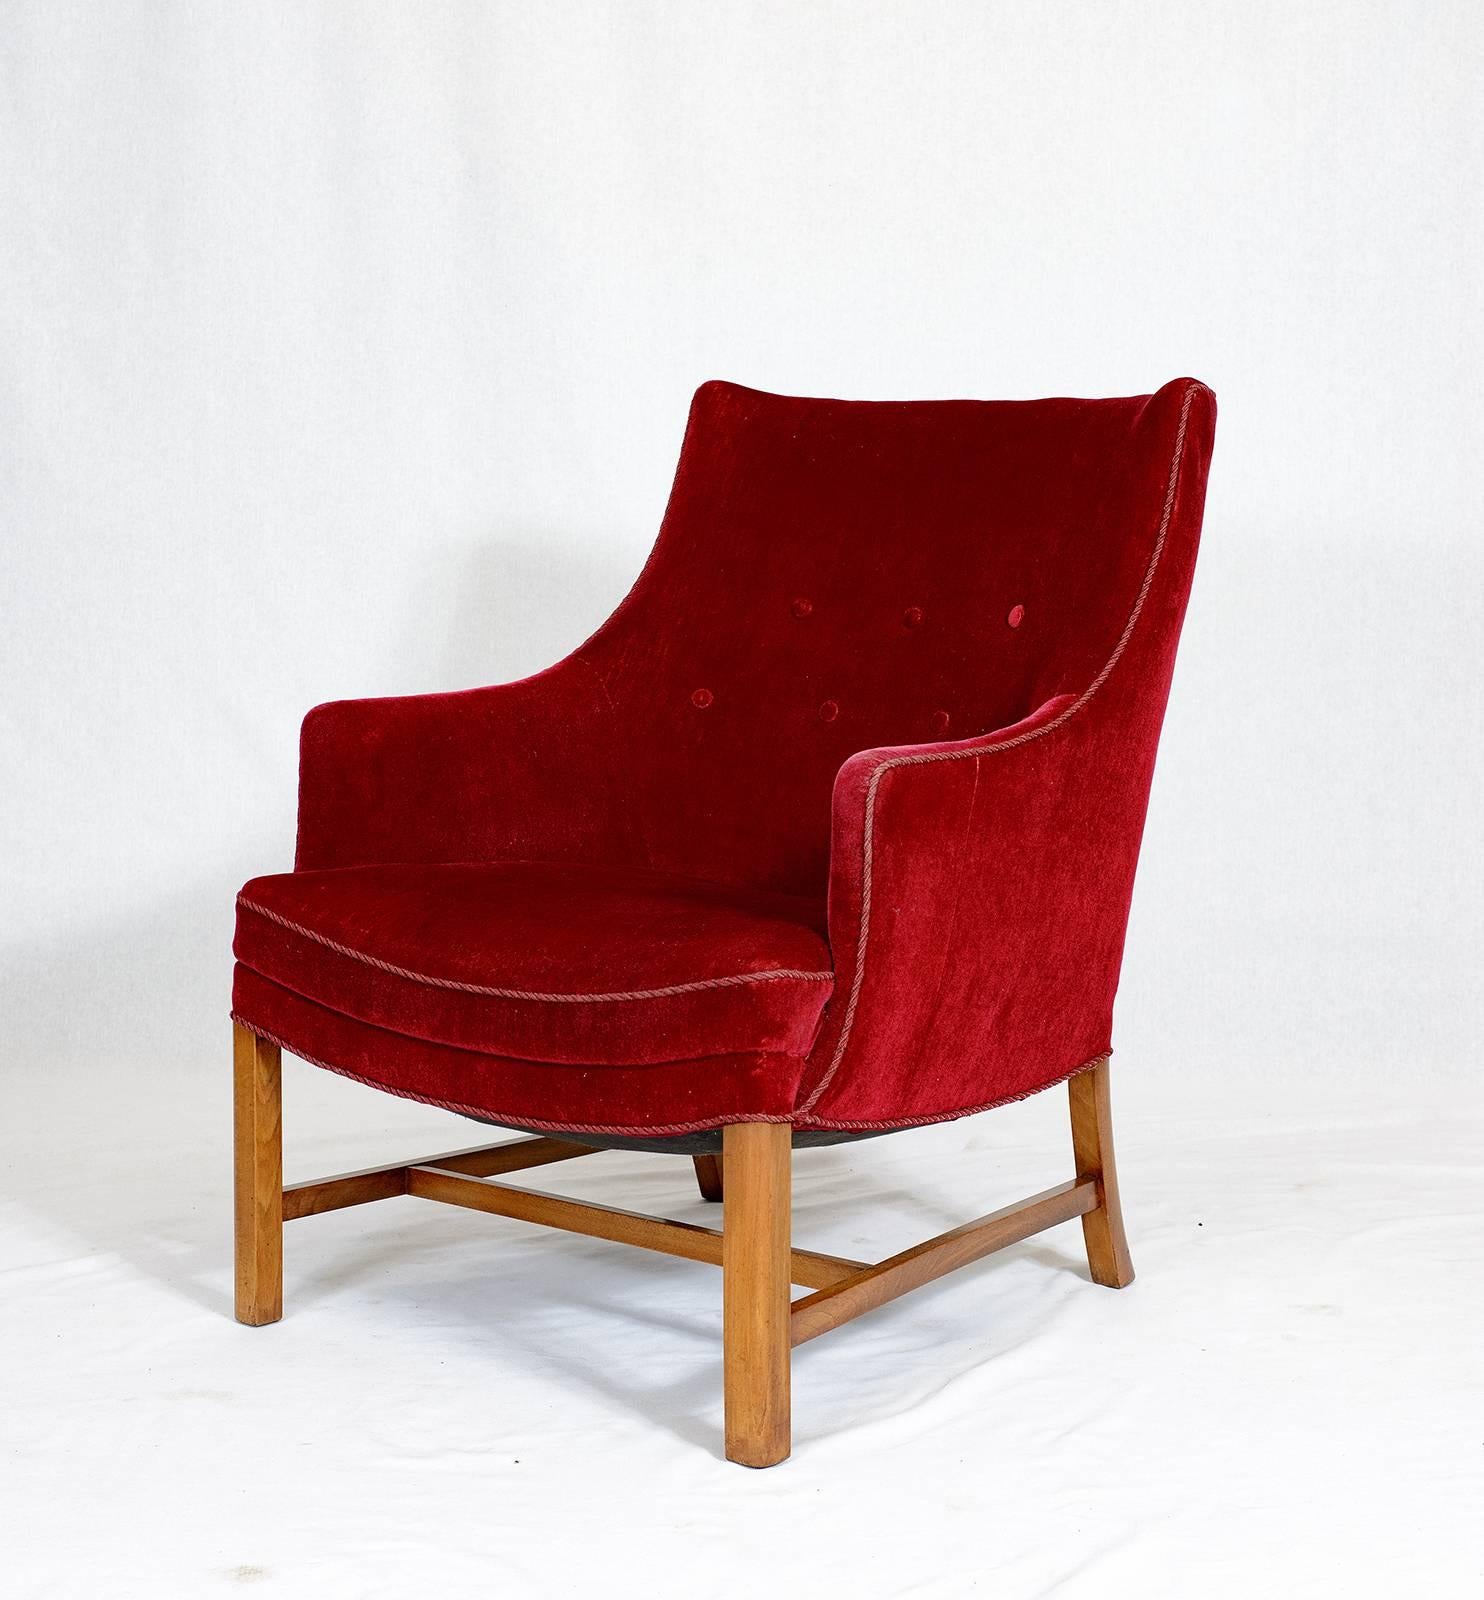 Frits Henningsen lounge chair from the 1940s.    Store formerly known as ARTFUL DODGER INC